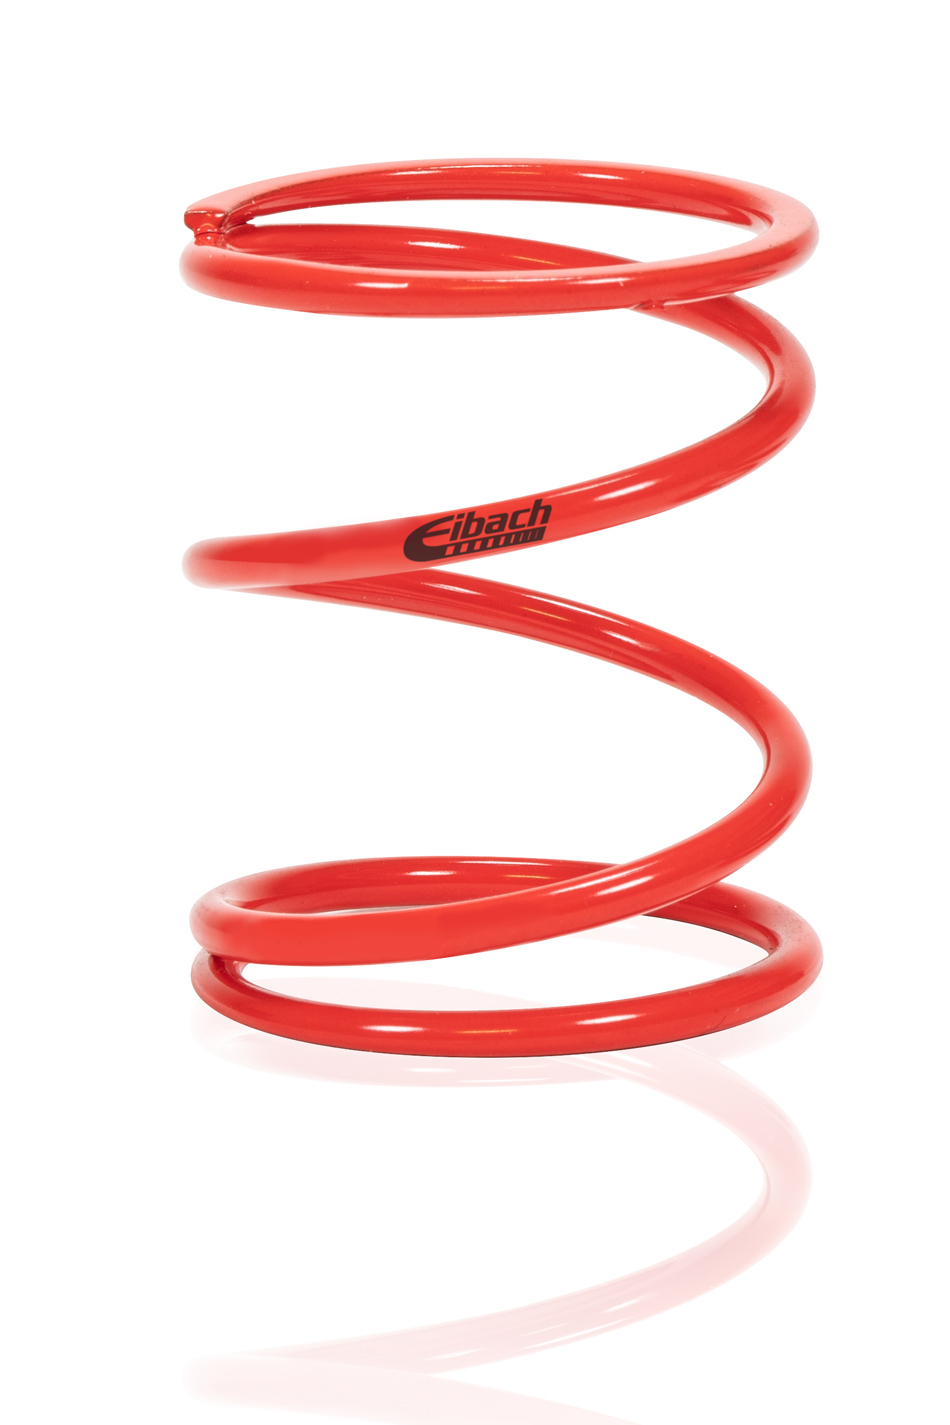 Eibach 0225.200.0100 Coil Spring, Barrel, Coil-Over, 1.360 in ID, 2.2500 in Length, 100 lb/in Spring Rate, Steel, Red Powder Coat, Each